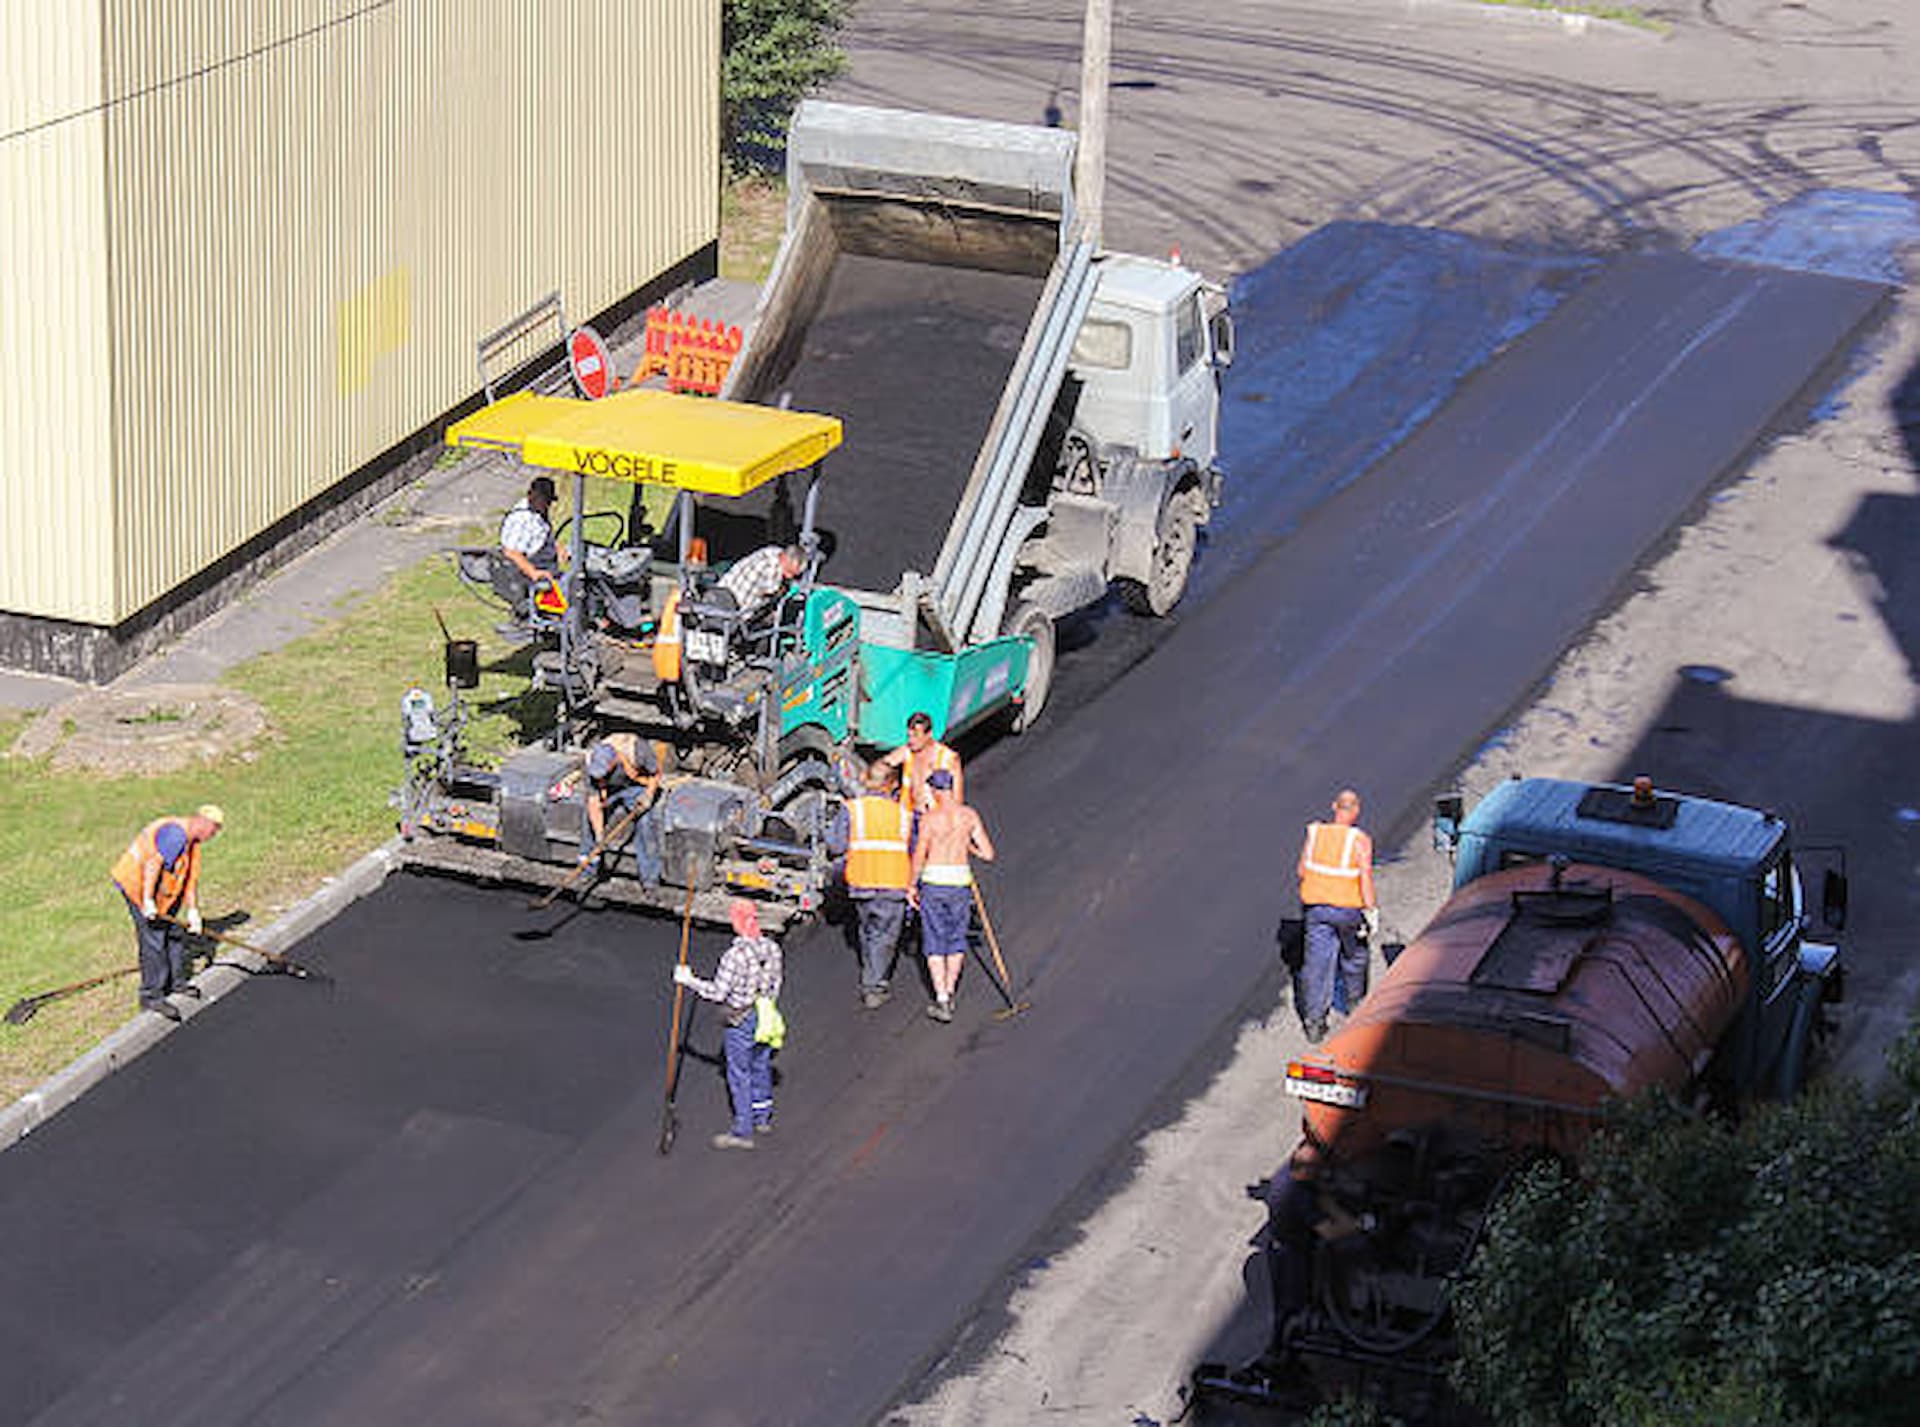 What Are The Benefits Of Tar & Chip Surfacing?